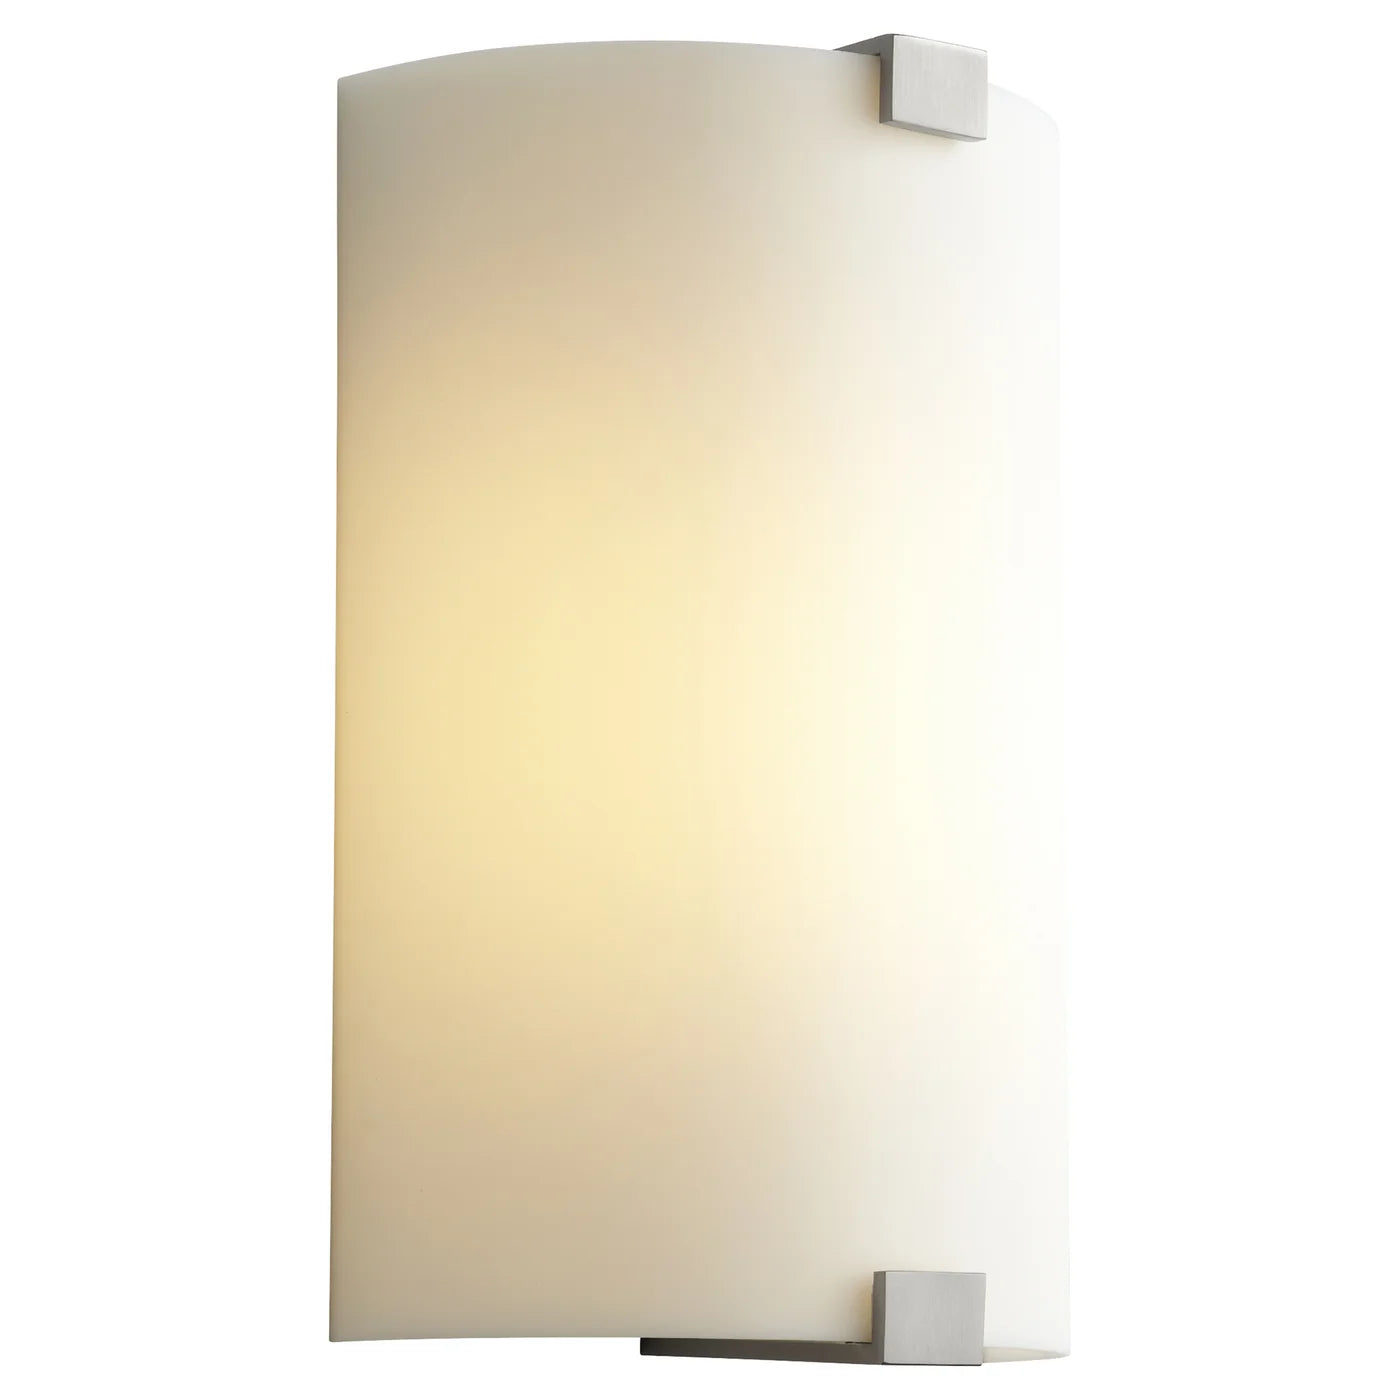 Oxygen Siren 3-563-224 LED Wall Sconce Light Fixture, ADA Compliant, Damp Rated - Satin Nickel